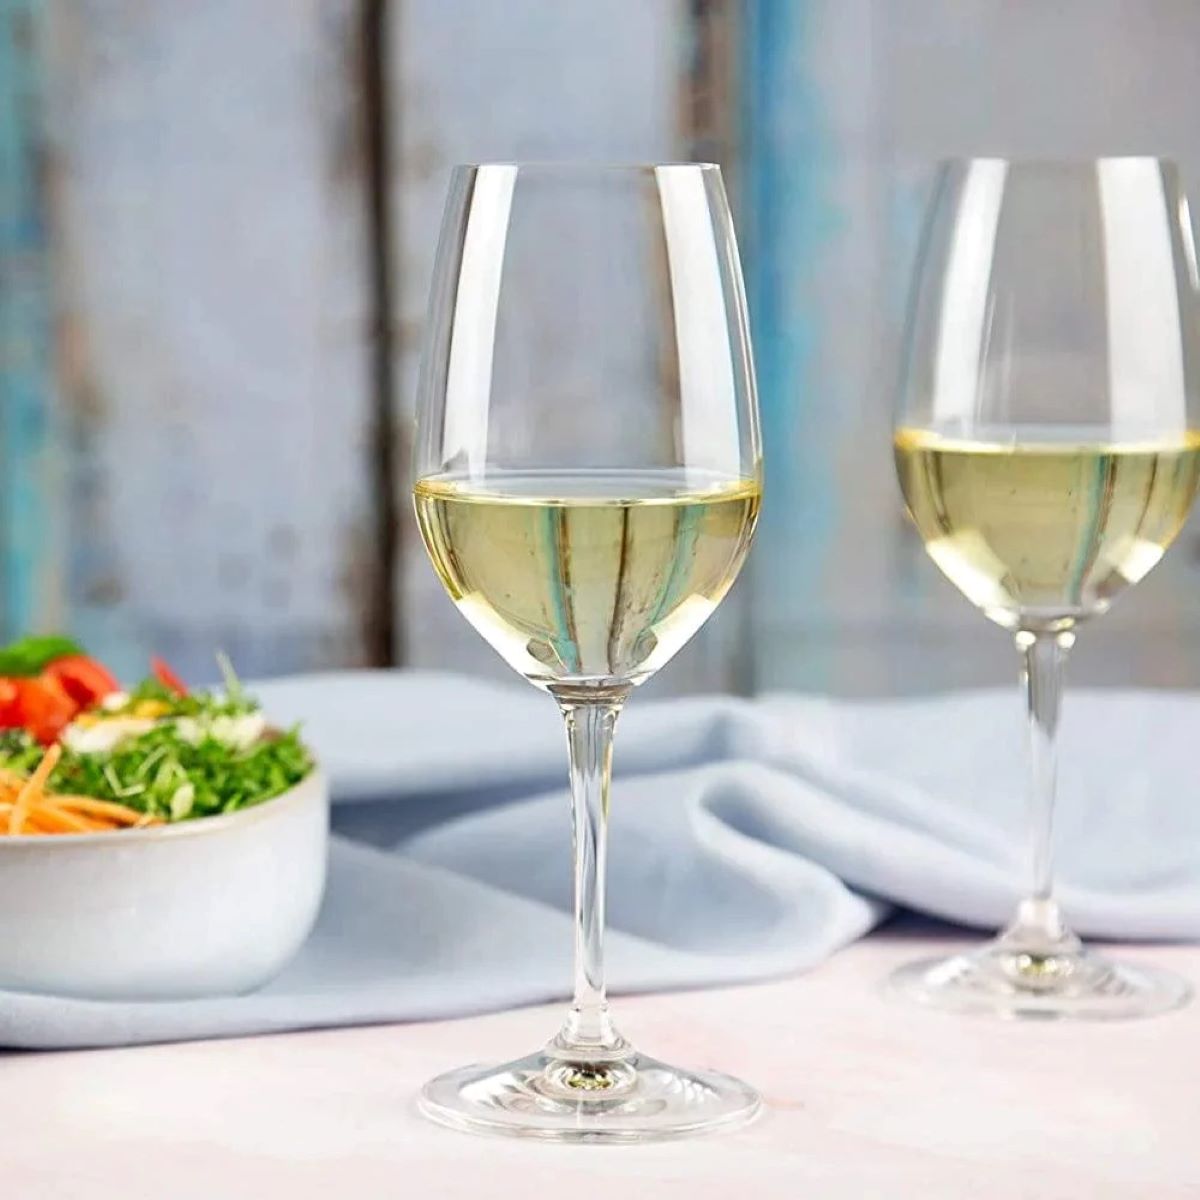 How Many Calories In A Glass Of White Wine